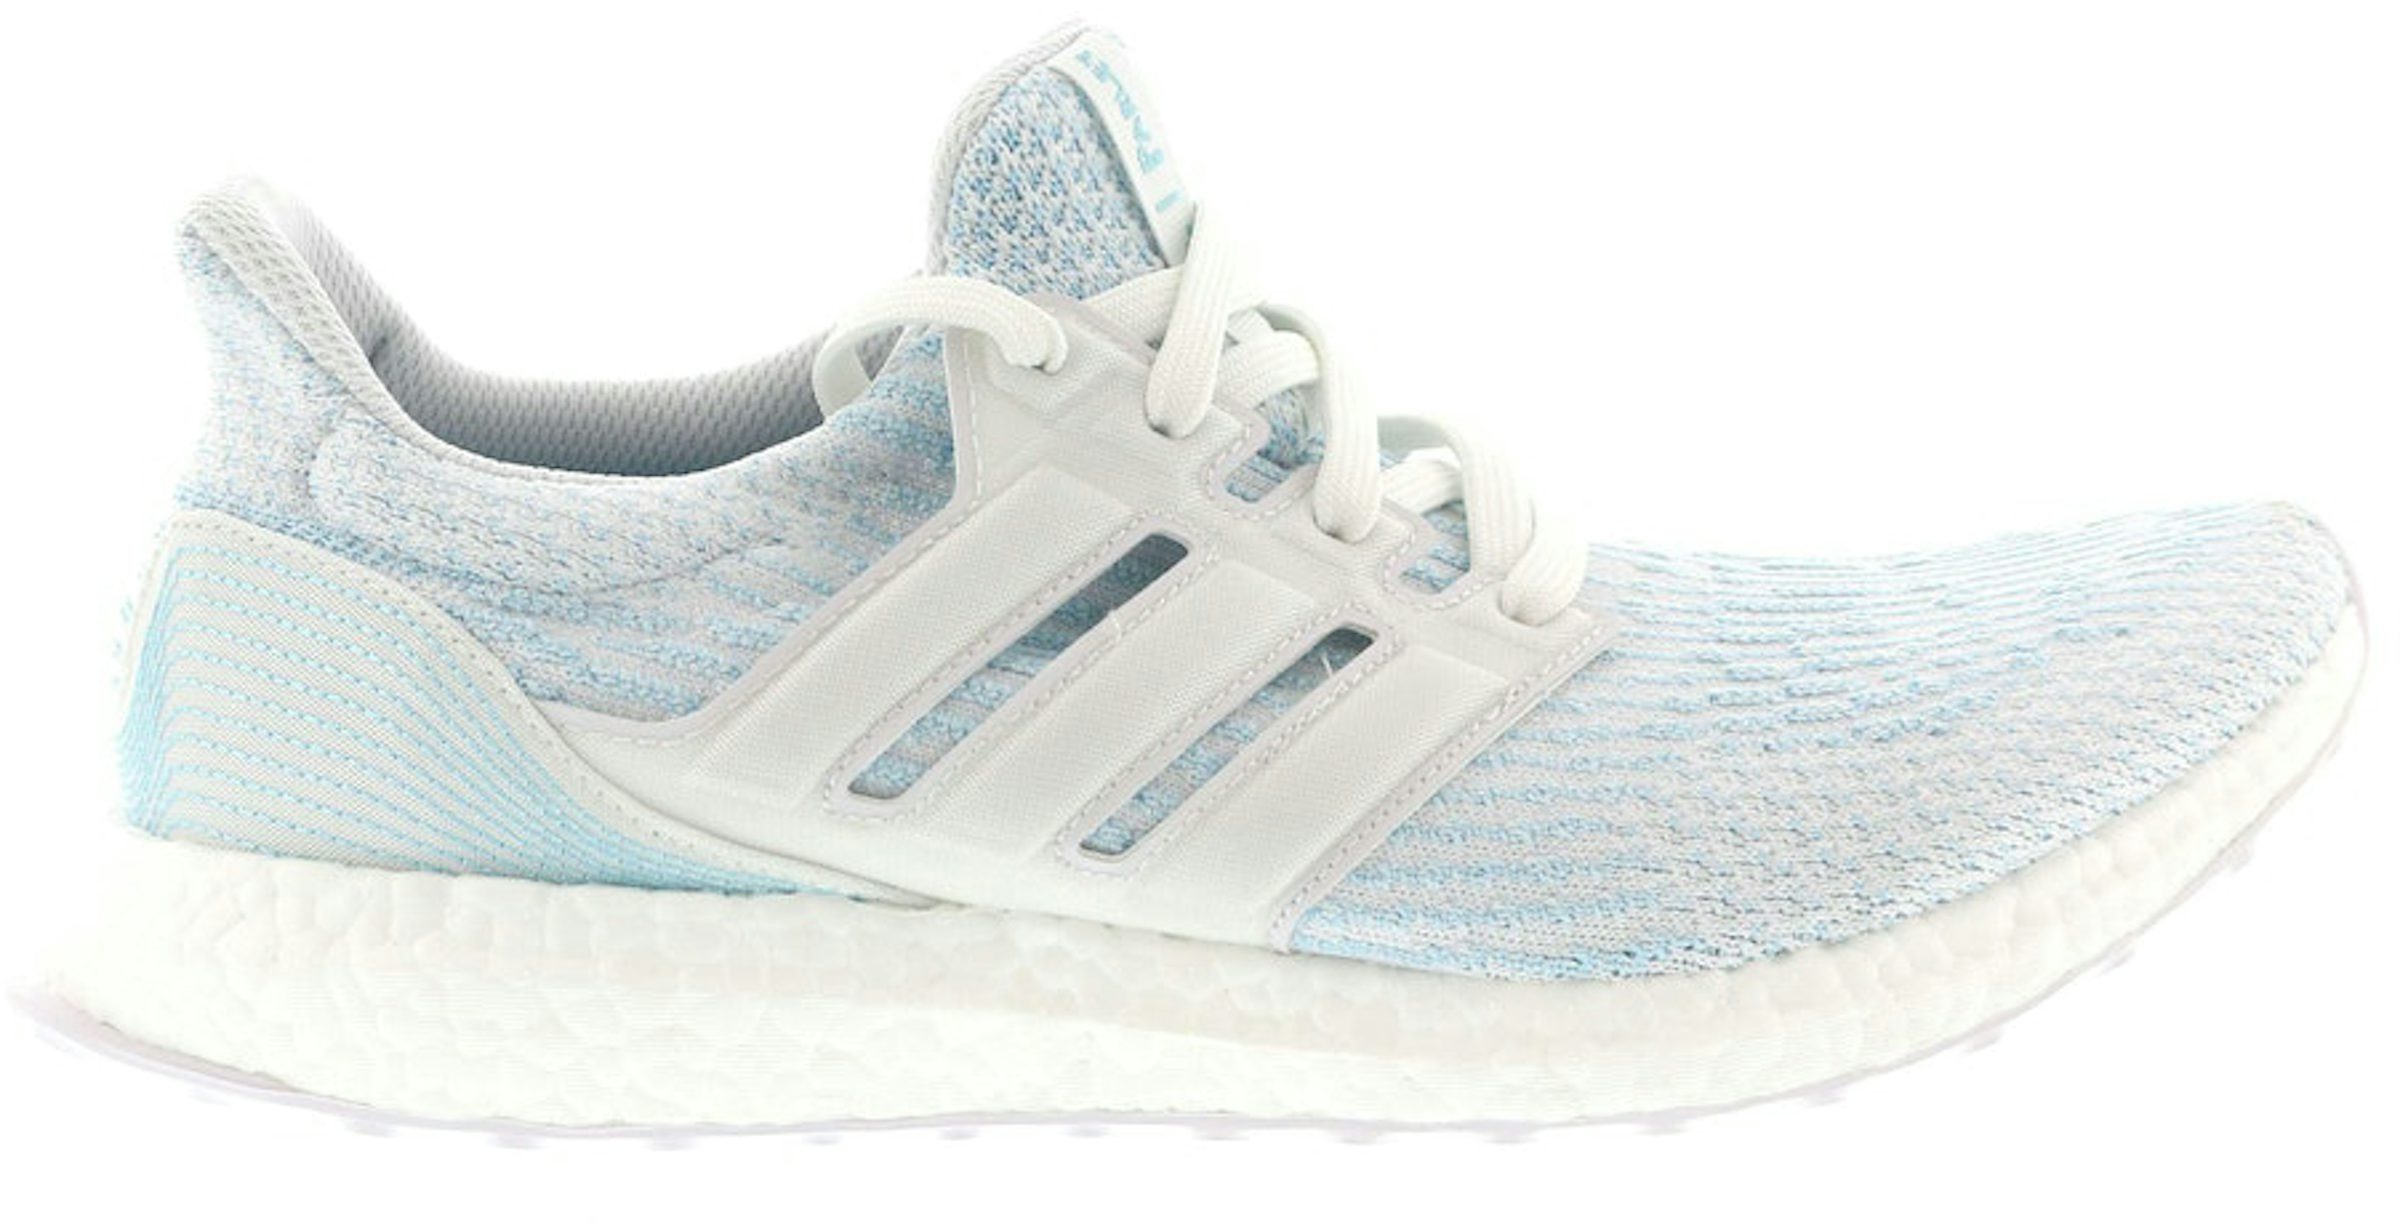 Louis Vuitton Styling Upgrades adidas Ultra BOOST 4.0 on New